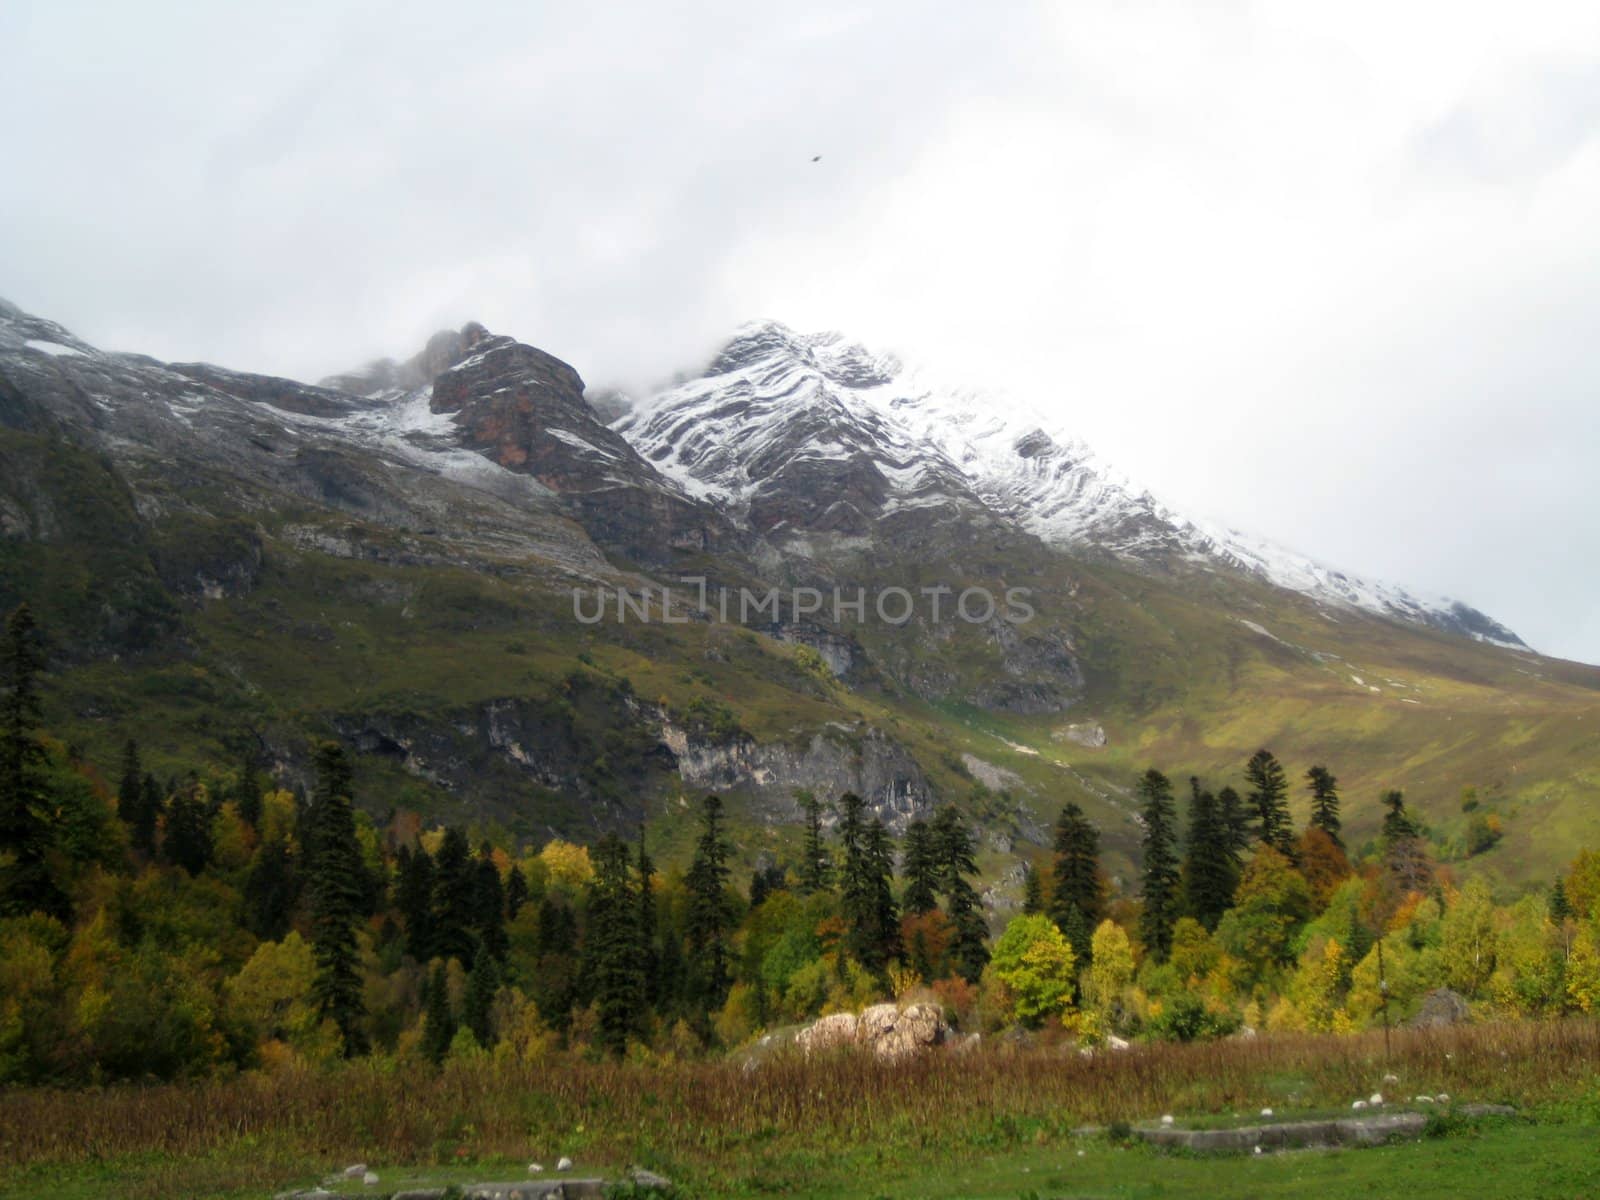 Mountains, caucasus, rocks, a relief, a landscape, wood, the nature, a panorama, a landscape, a ridge, top, breed, the sky, reserve, a background, a kind, a structure, trees, a slope, beauty, clouds, a file, pass, a hill, tourism, travel, rest, snow, a glade